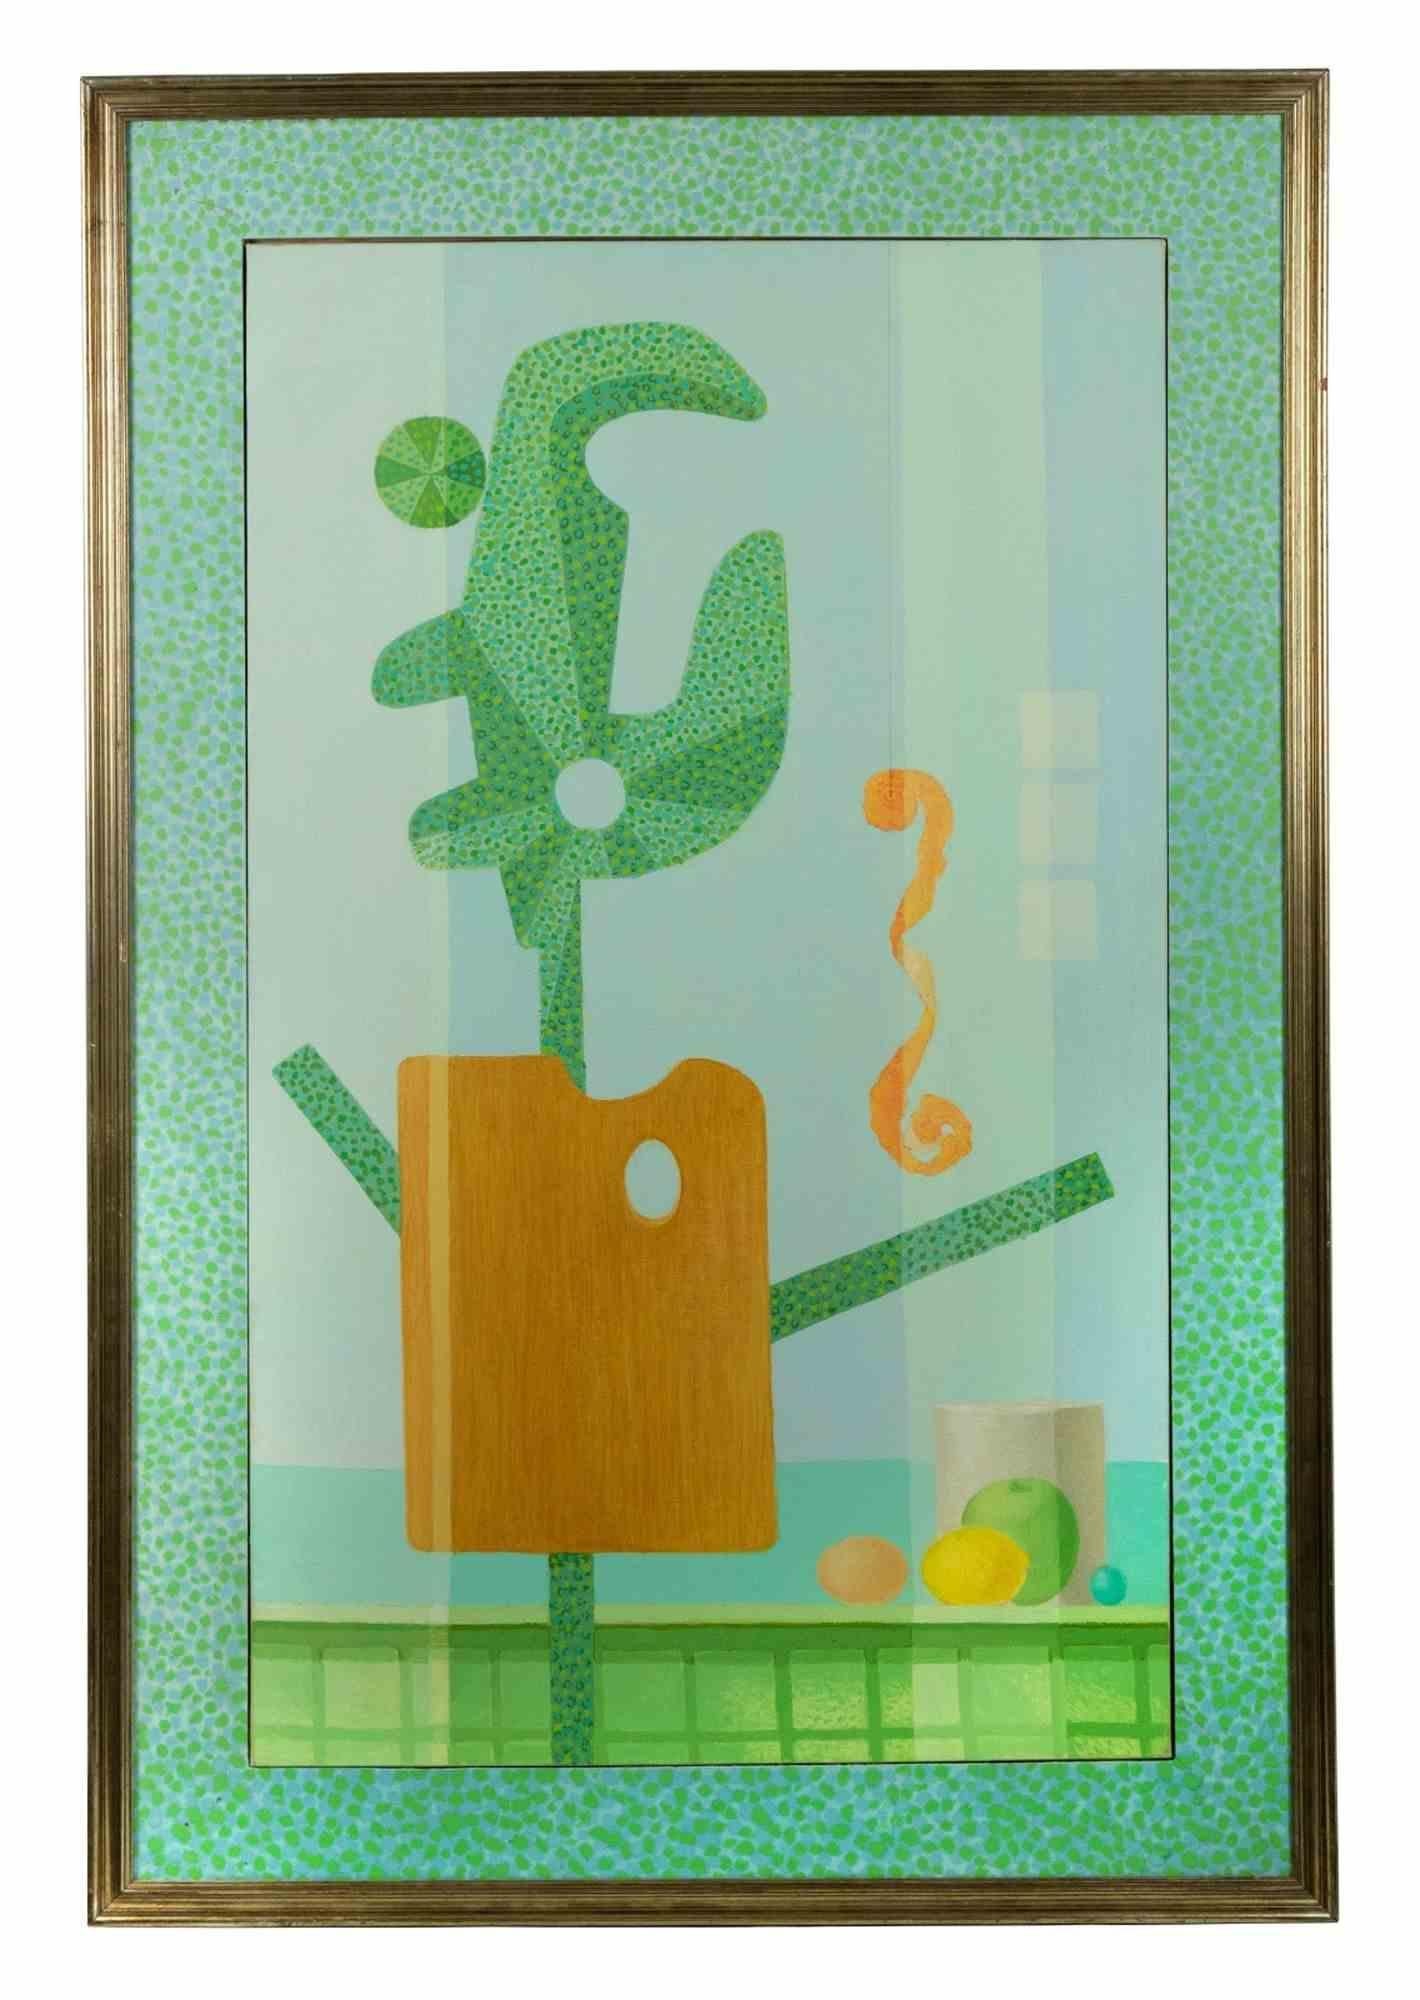 Abstract Green Composition is an artwork realized by Leo Guida, in 1970s. 

Oil painting on canvas, with frame. 

122 x 81 cm.

Good conditions